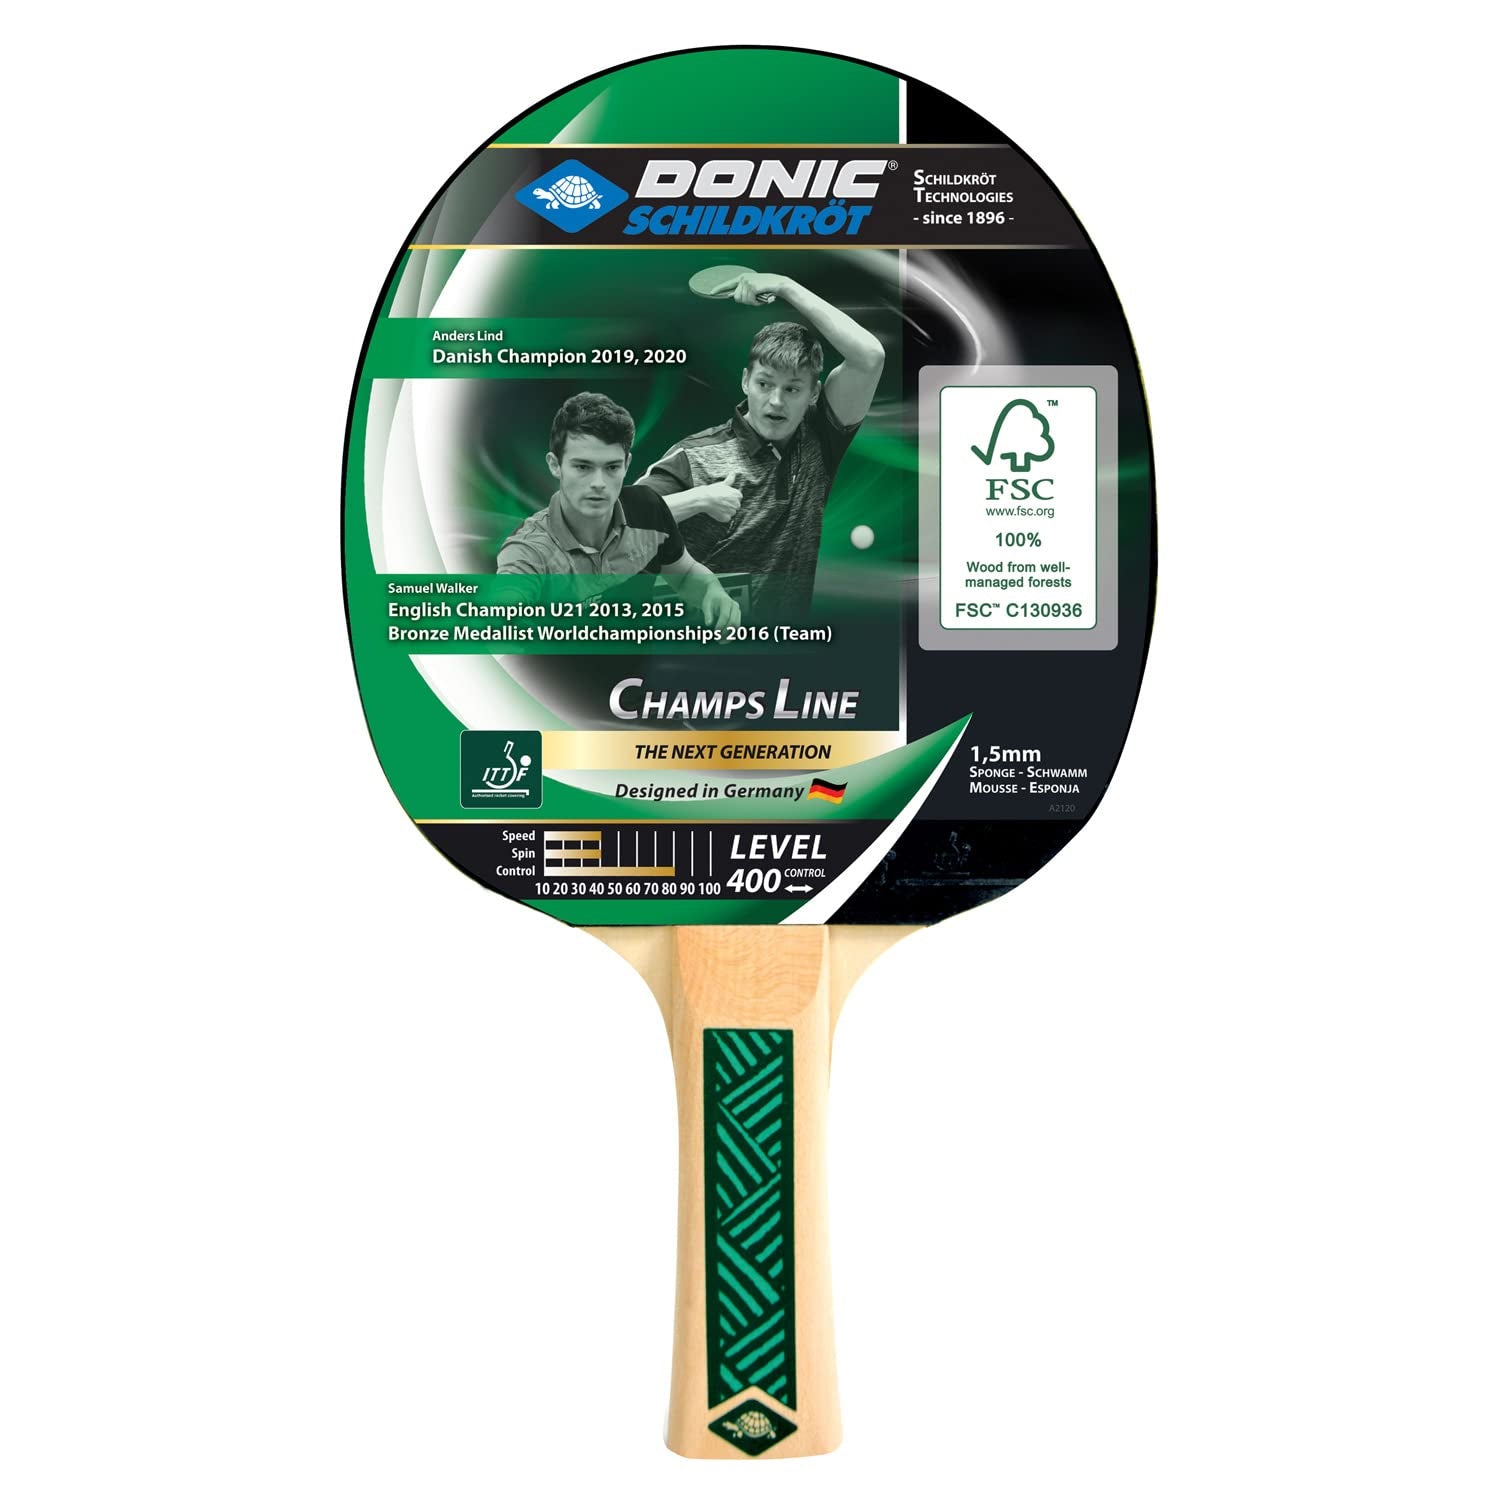 Donic Young Champ 400 Table Tennis Bat - Best Price online Prokicksports.com